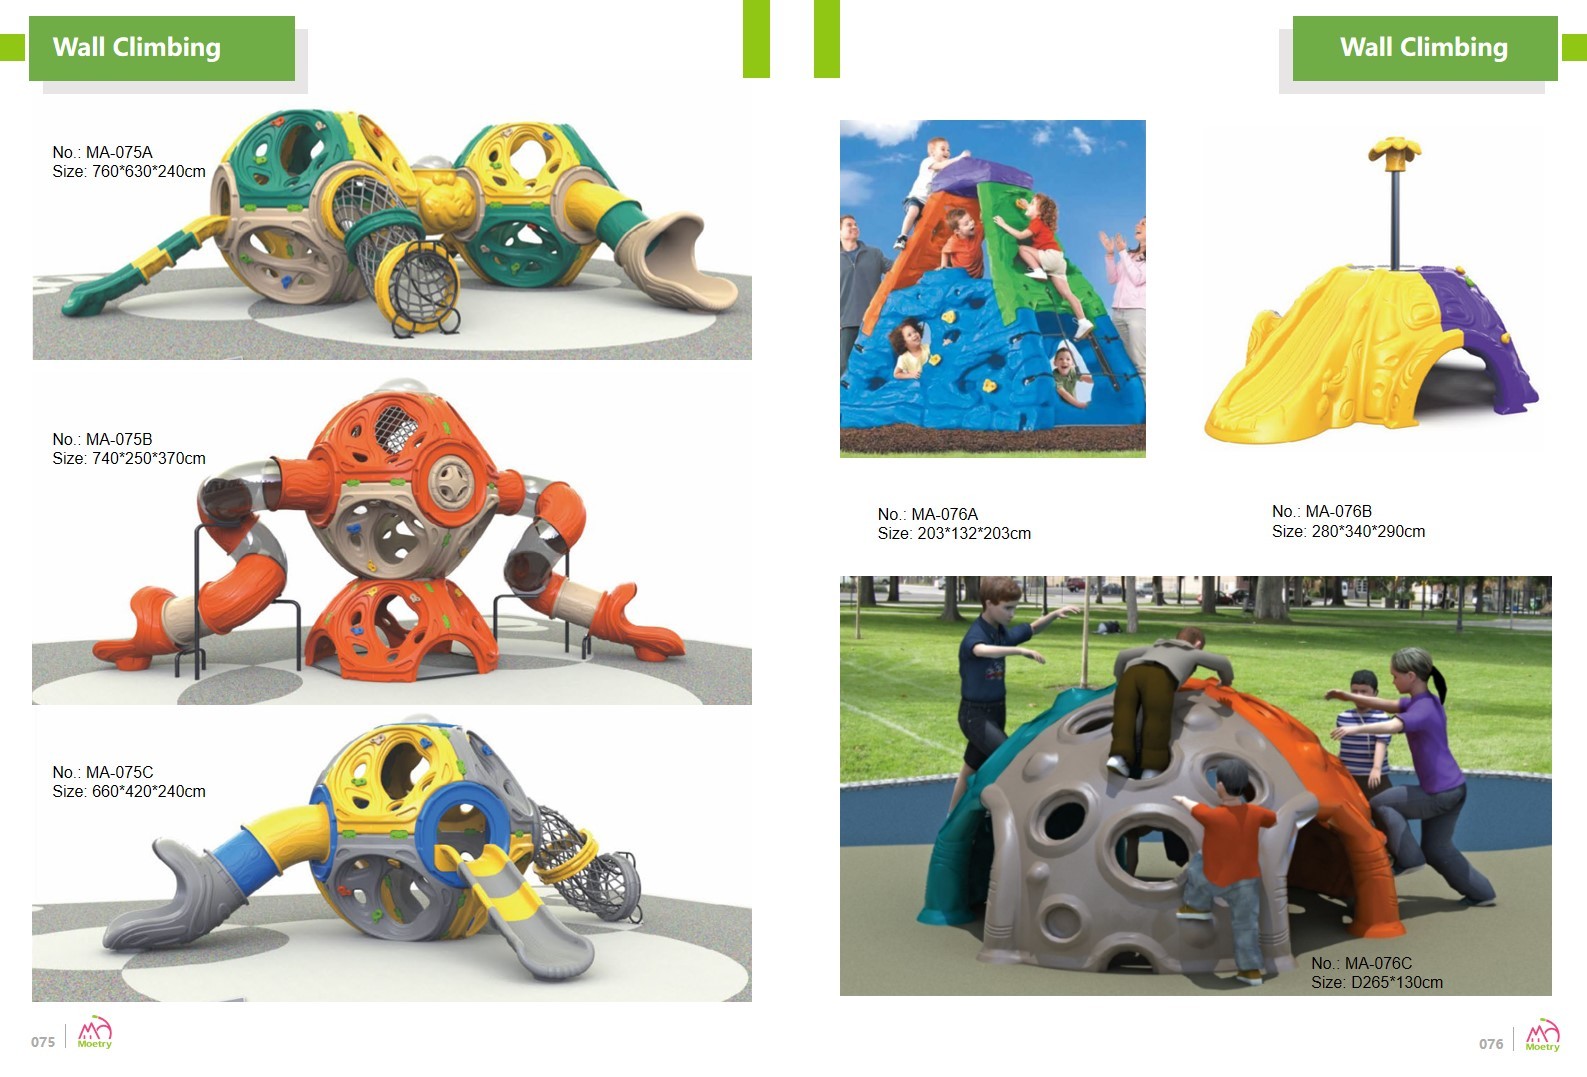 Large and small sized children's outside plastic climbing equipment with tunnel and slide